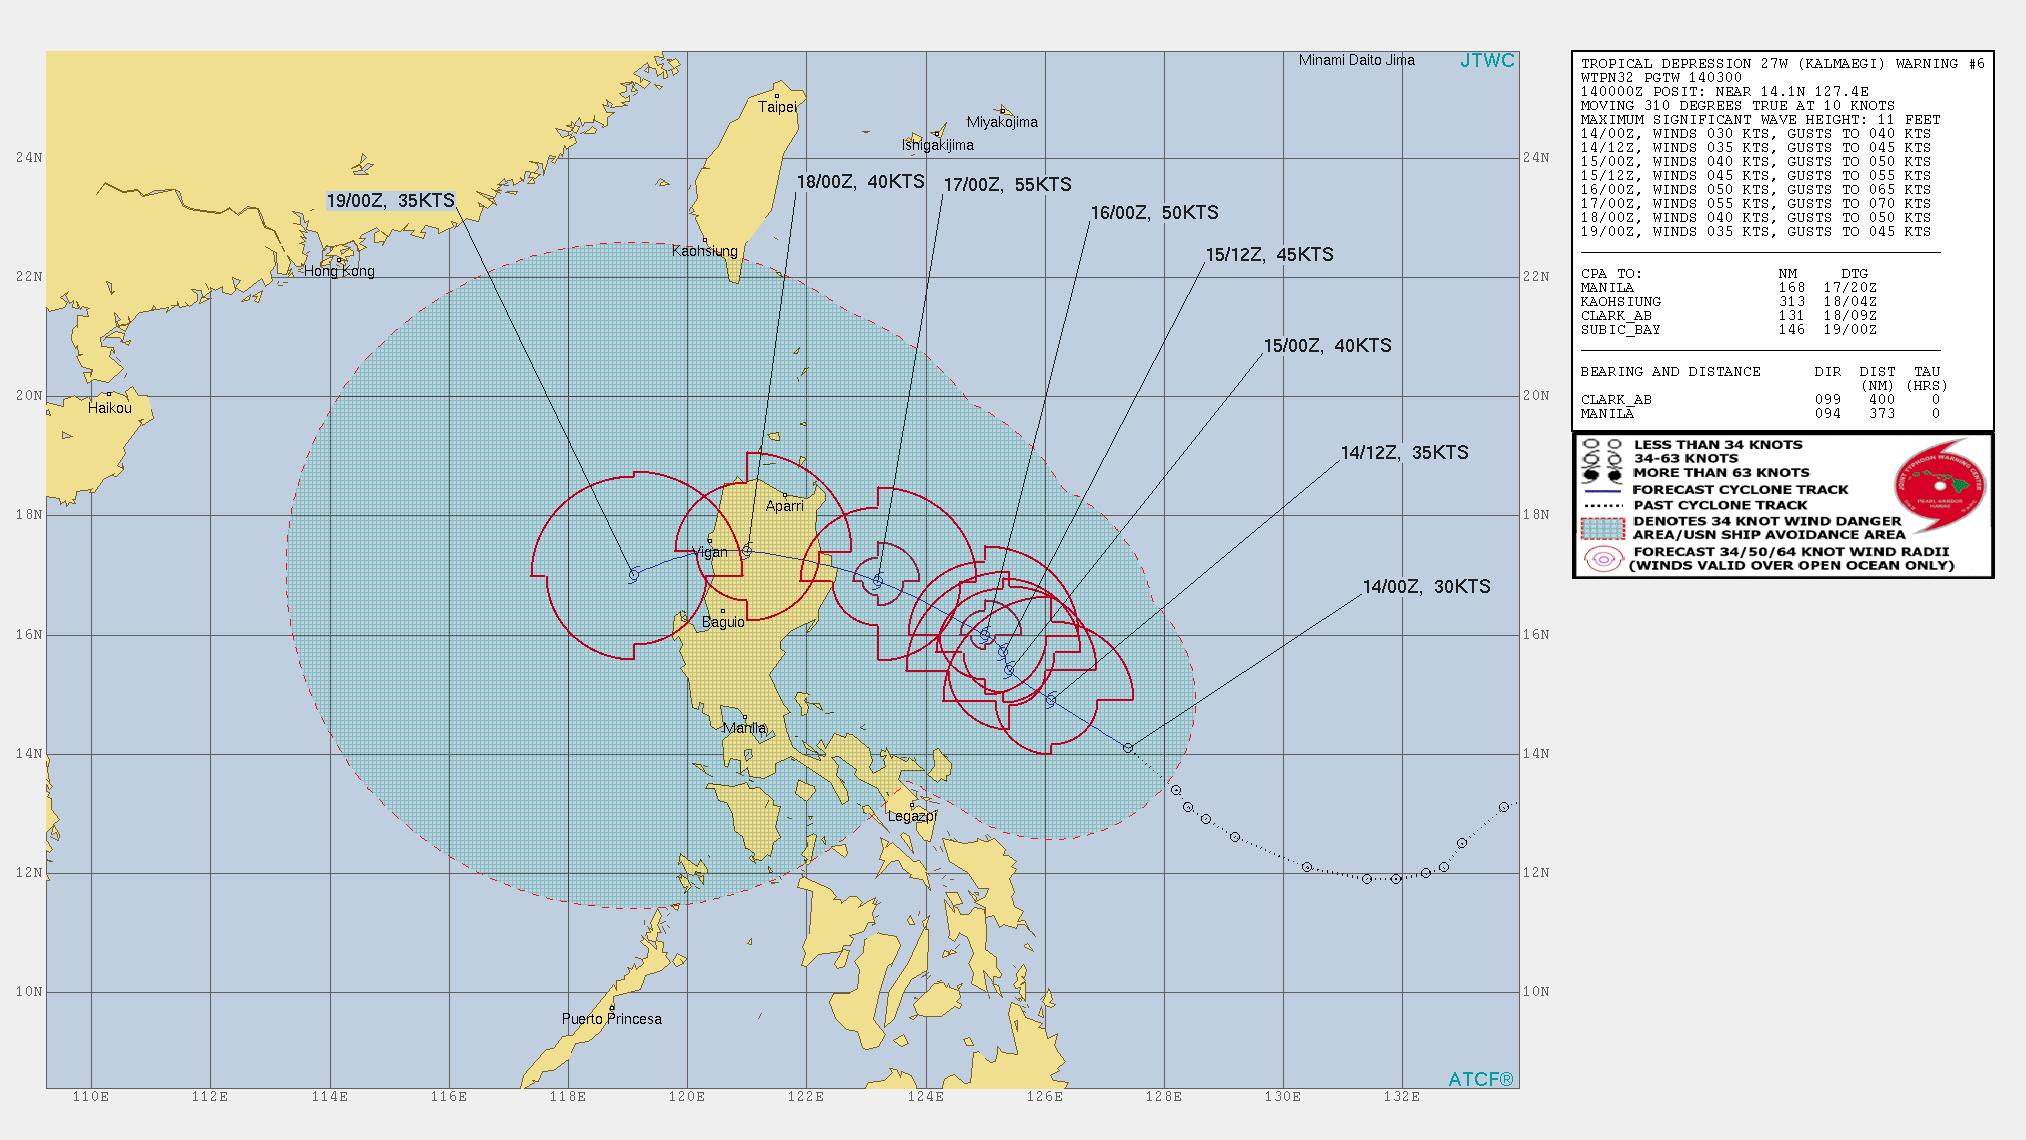 TD 27W: FORECAST TO BE CLOSE TO EAST LUZON IN 72H AS A 55KTS CYCLONE